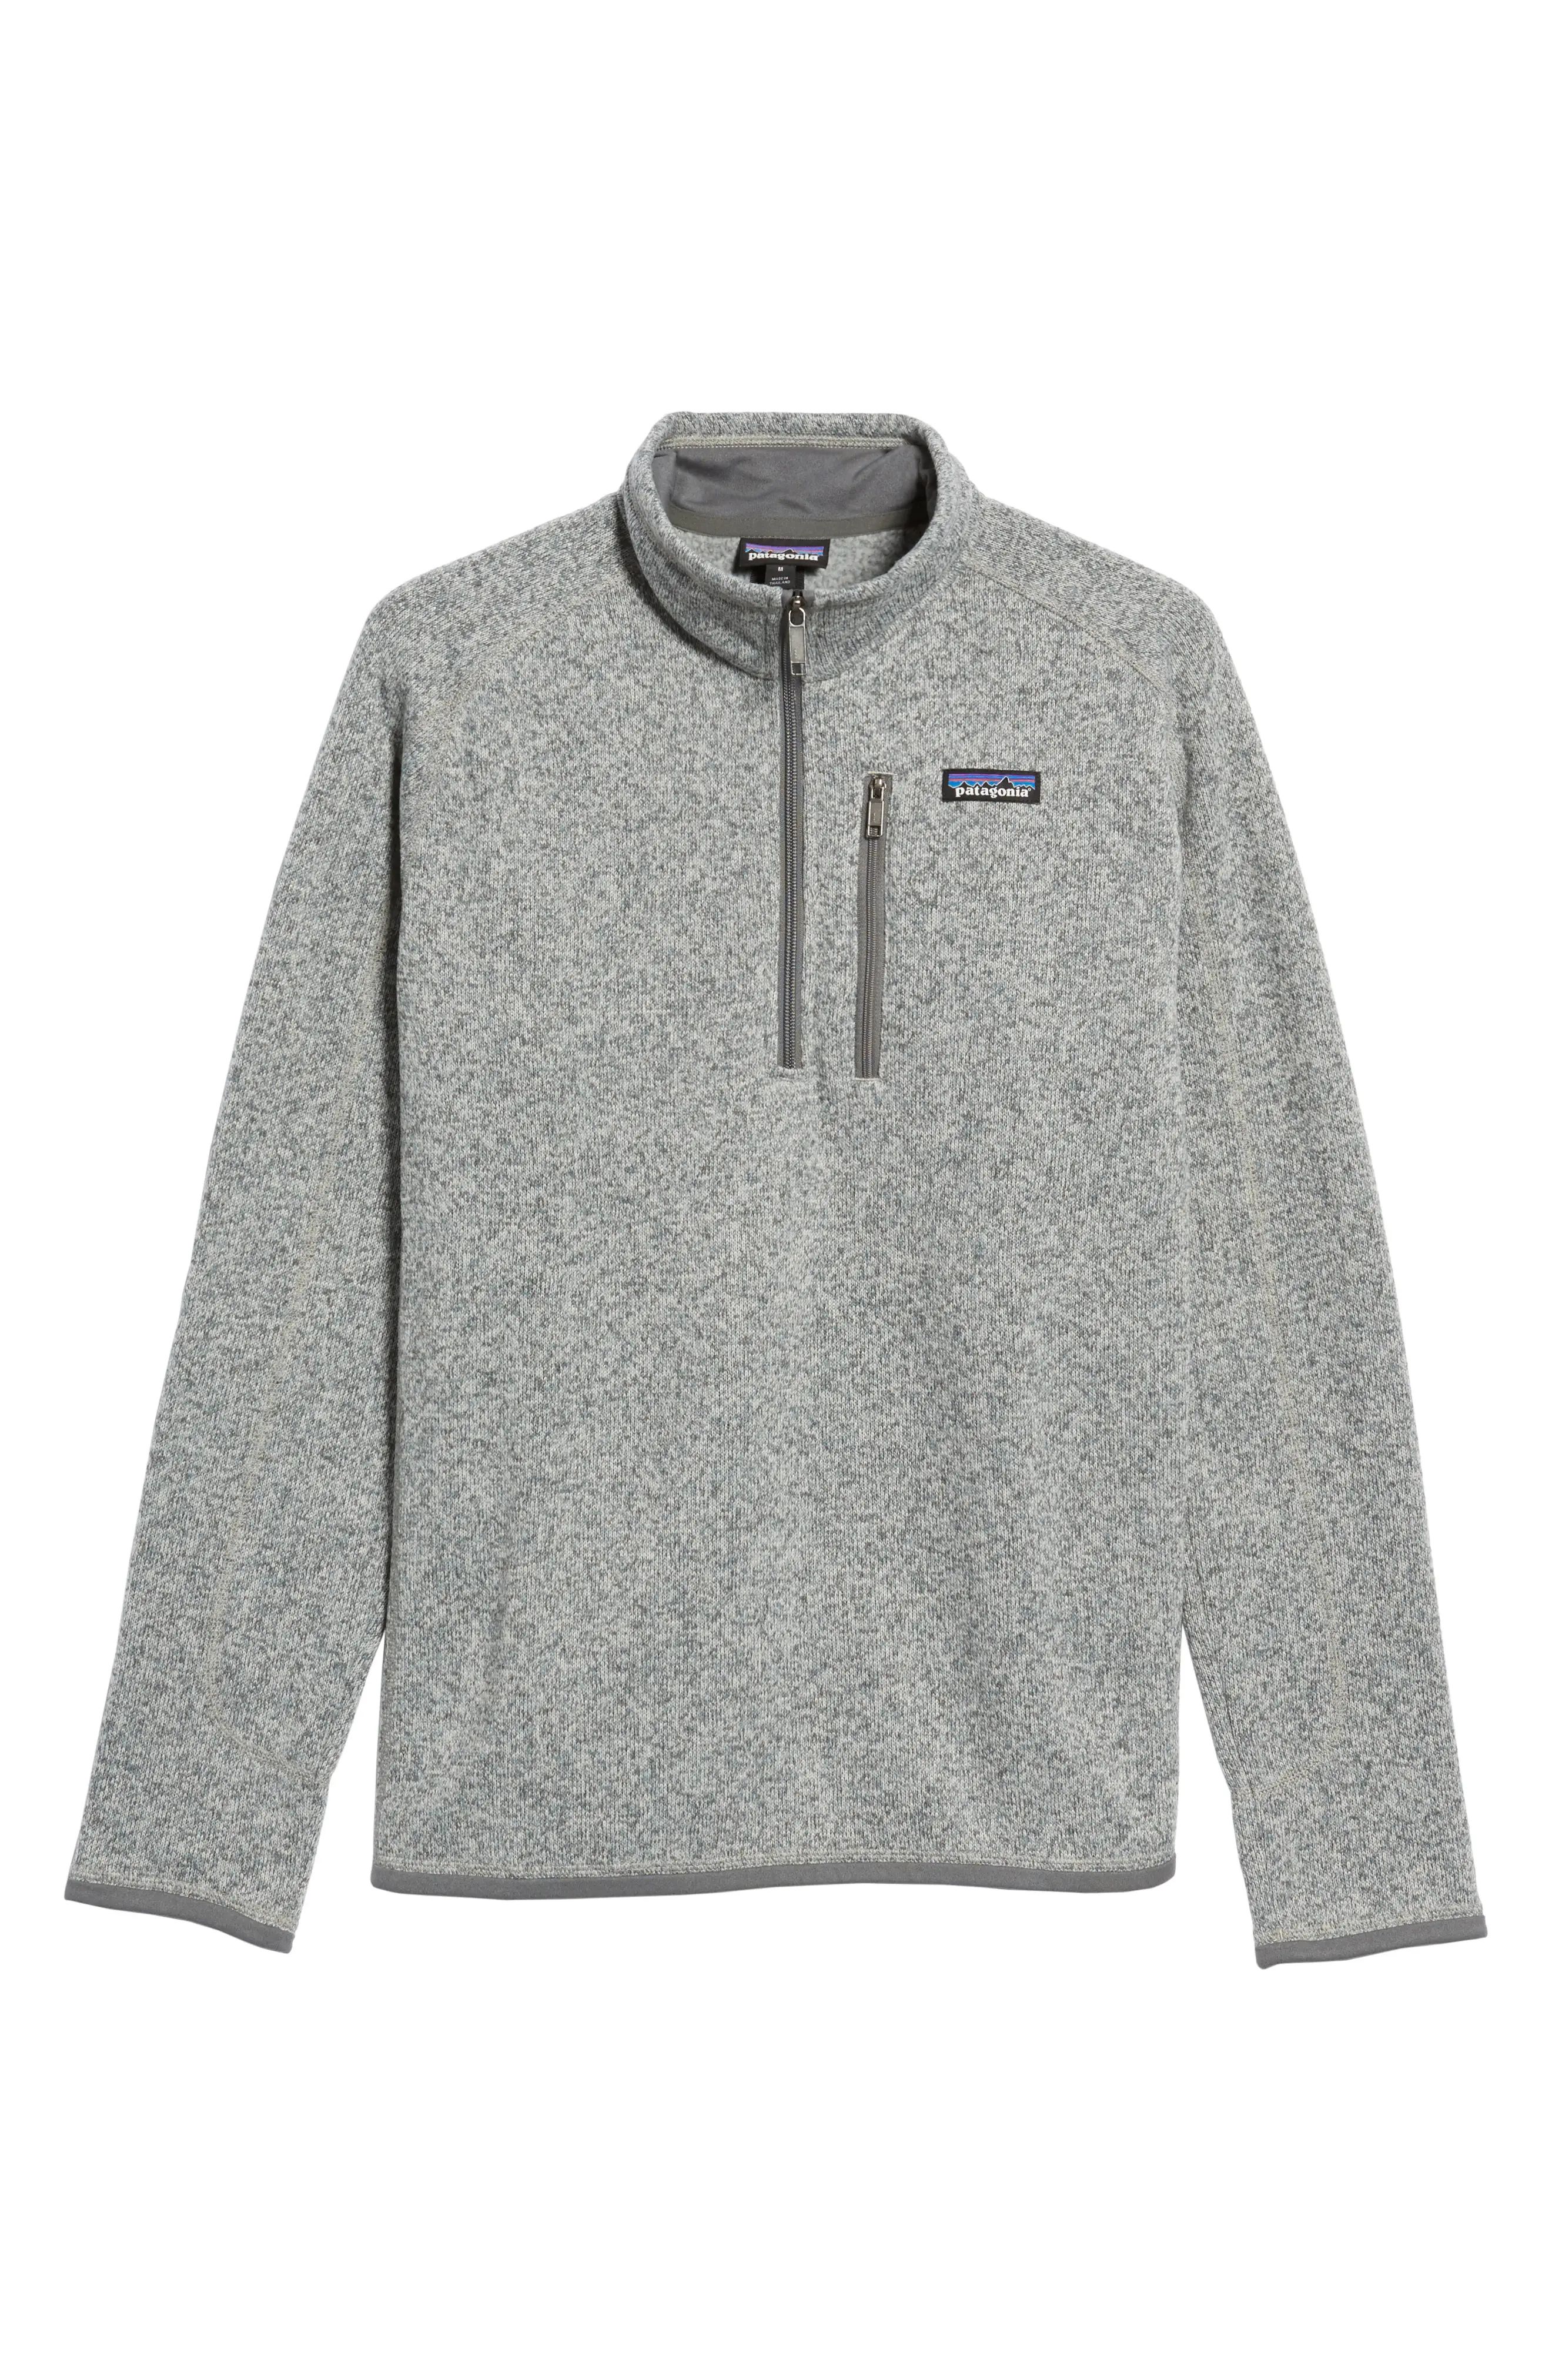 Men's Patagonia Better Sweater Quarter Zip Pullover, Size Small - Grey | Nordstrom